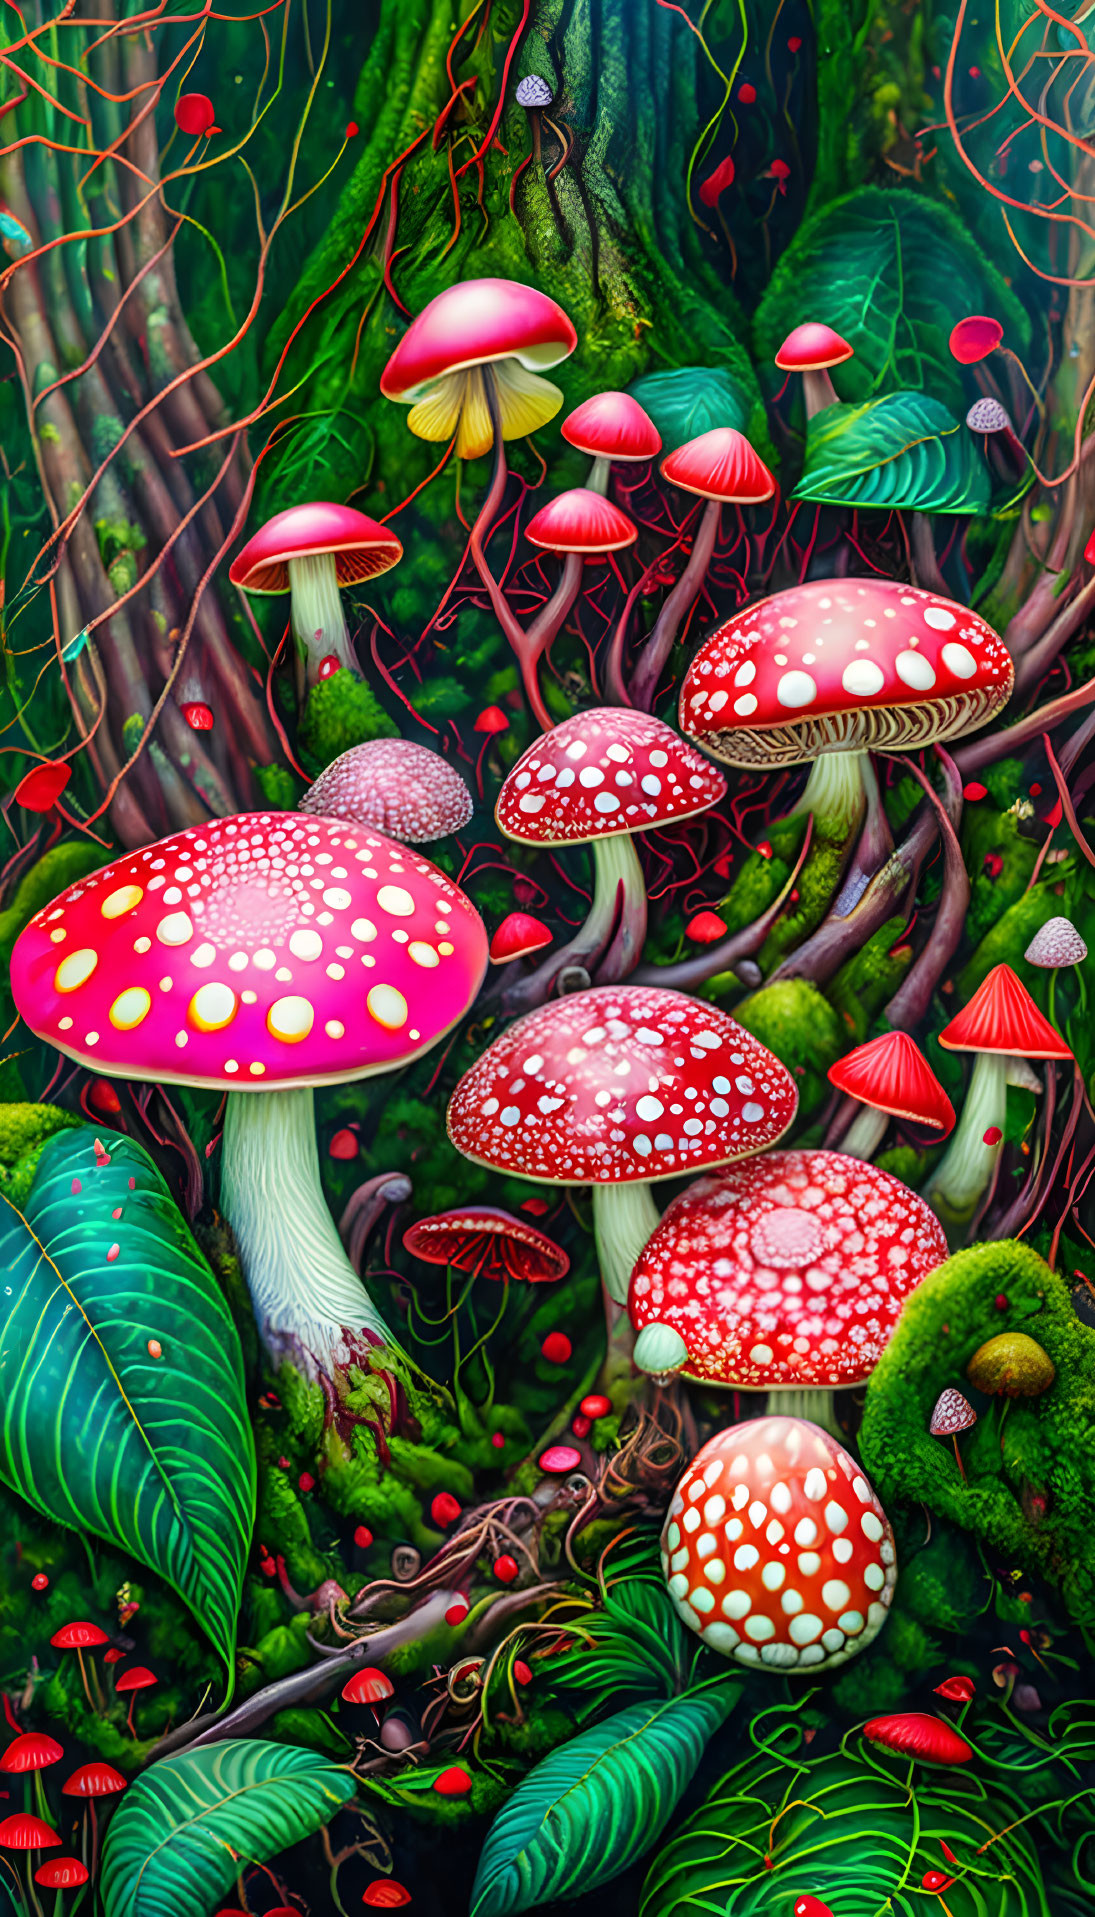 Colorful forest illustration with red and white mushrooms and lush greenery